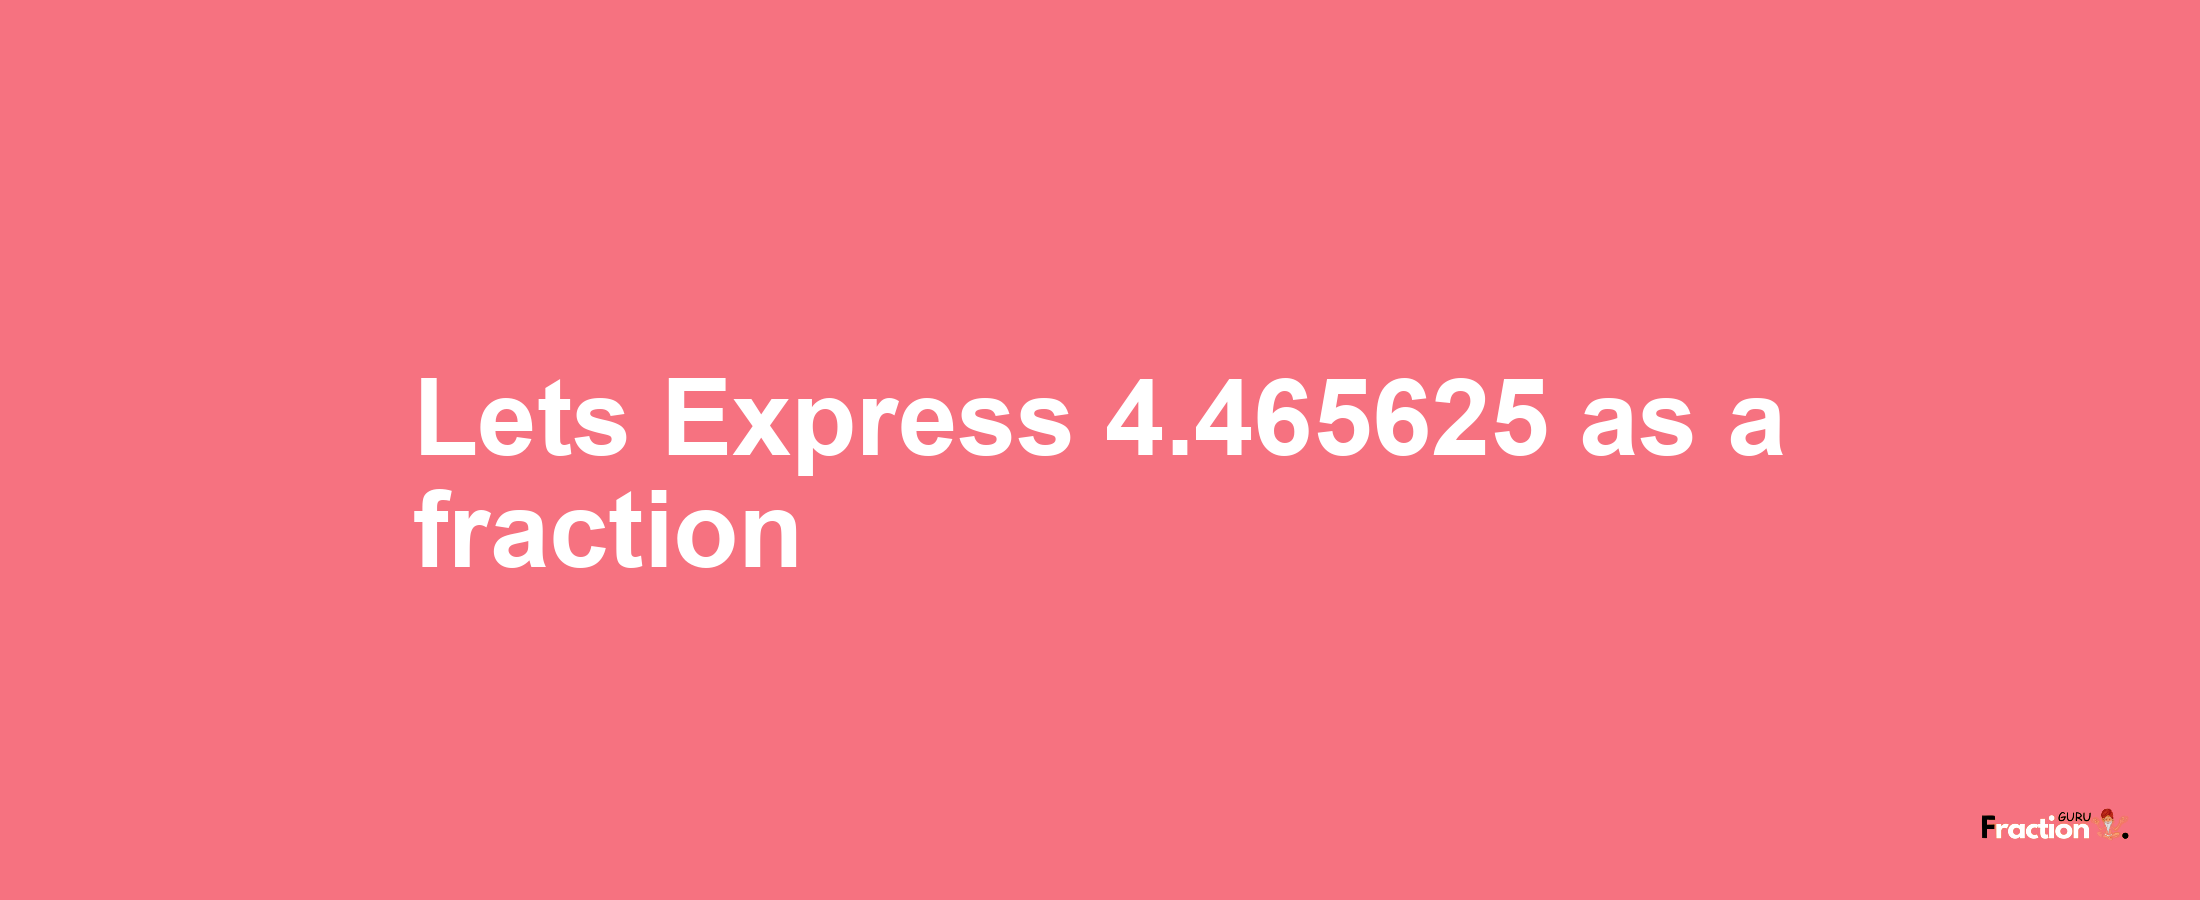 Lets Express 4.465625 as afraction